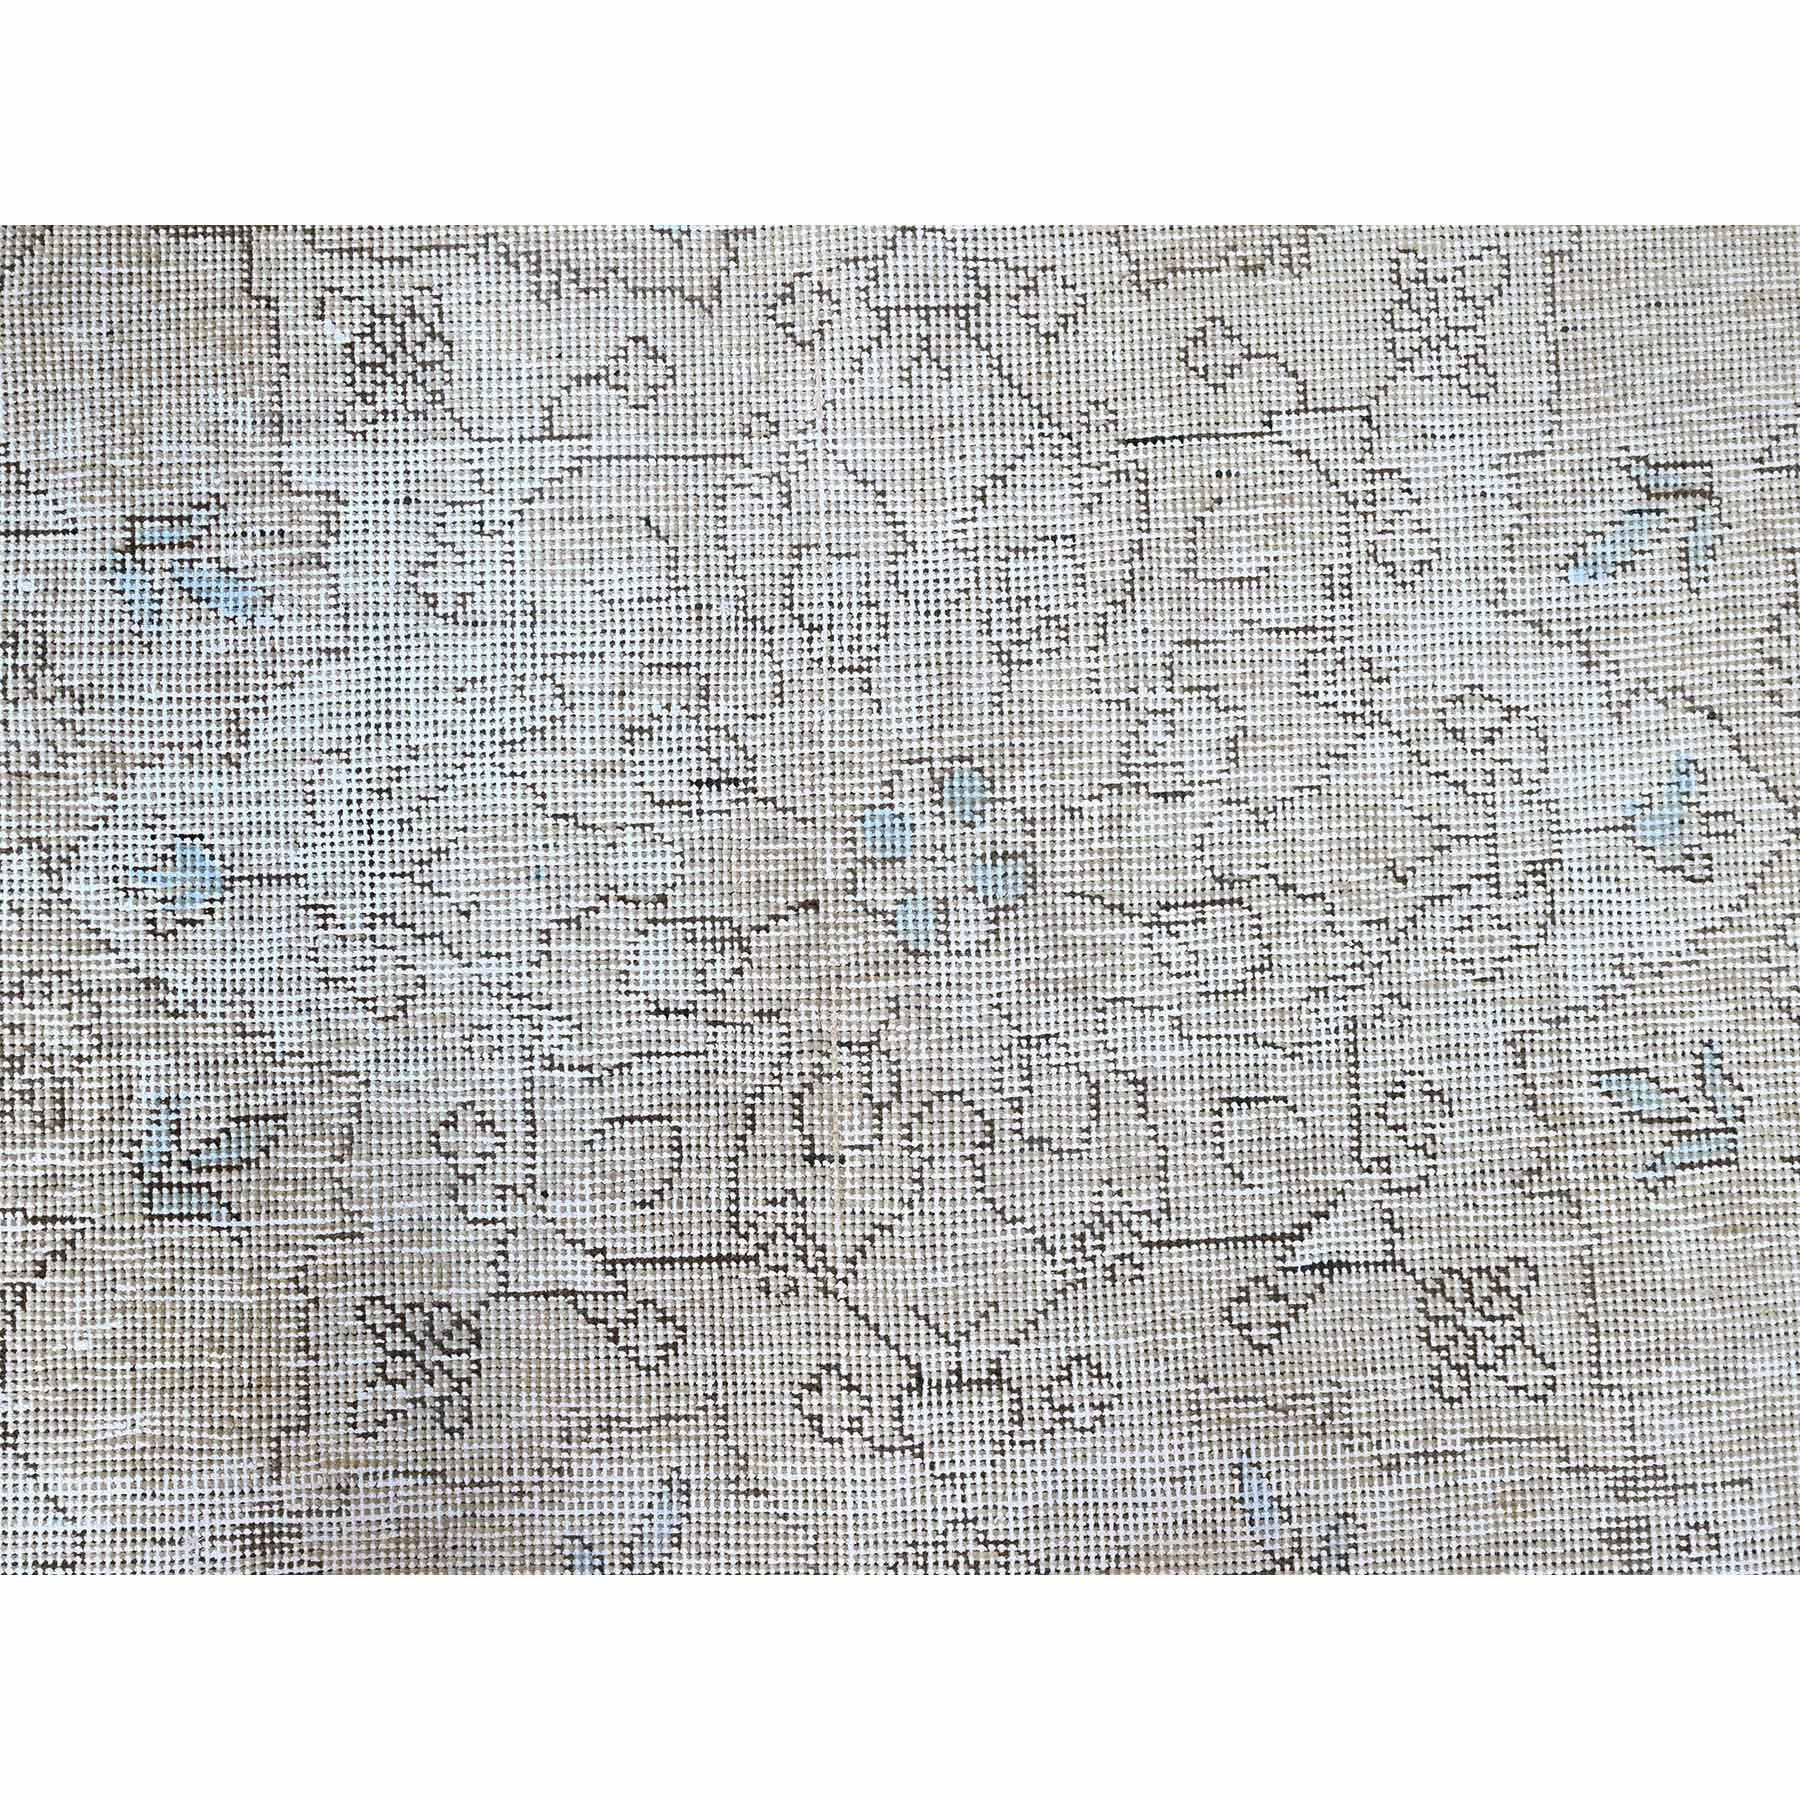 Overdyed-Vintage-Hand-Knotted-Rug-430505